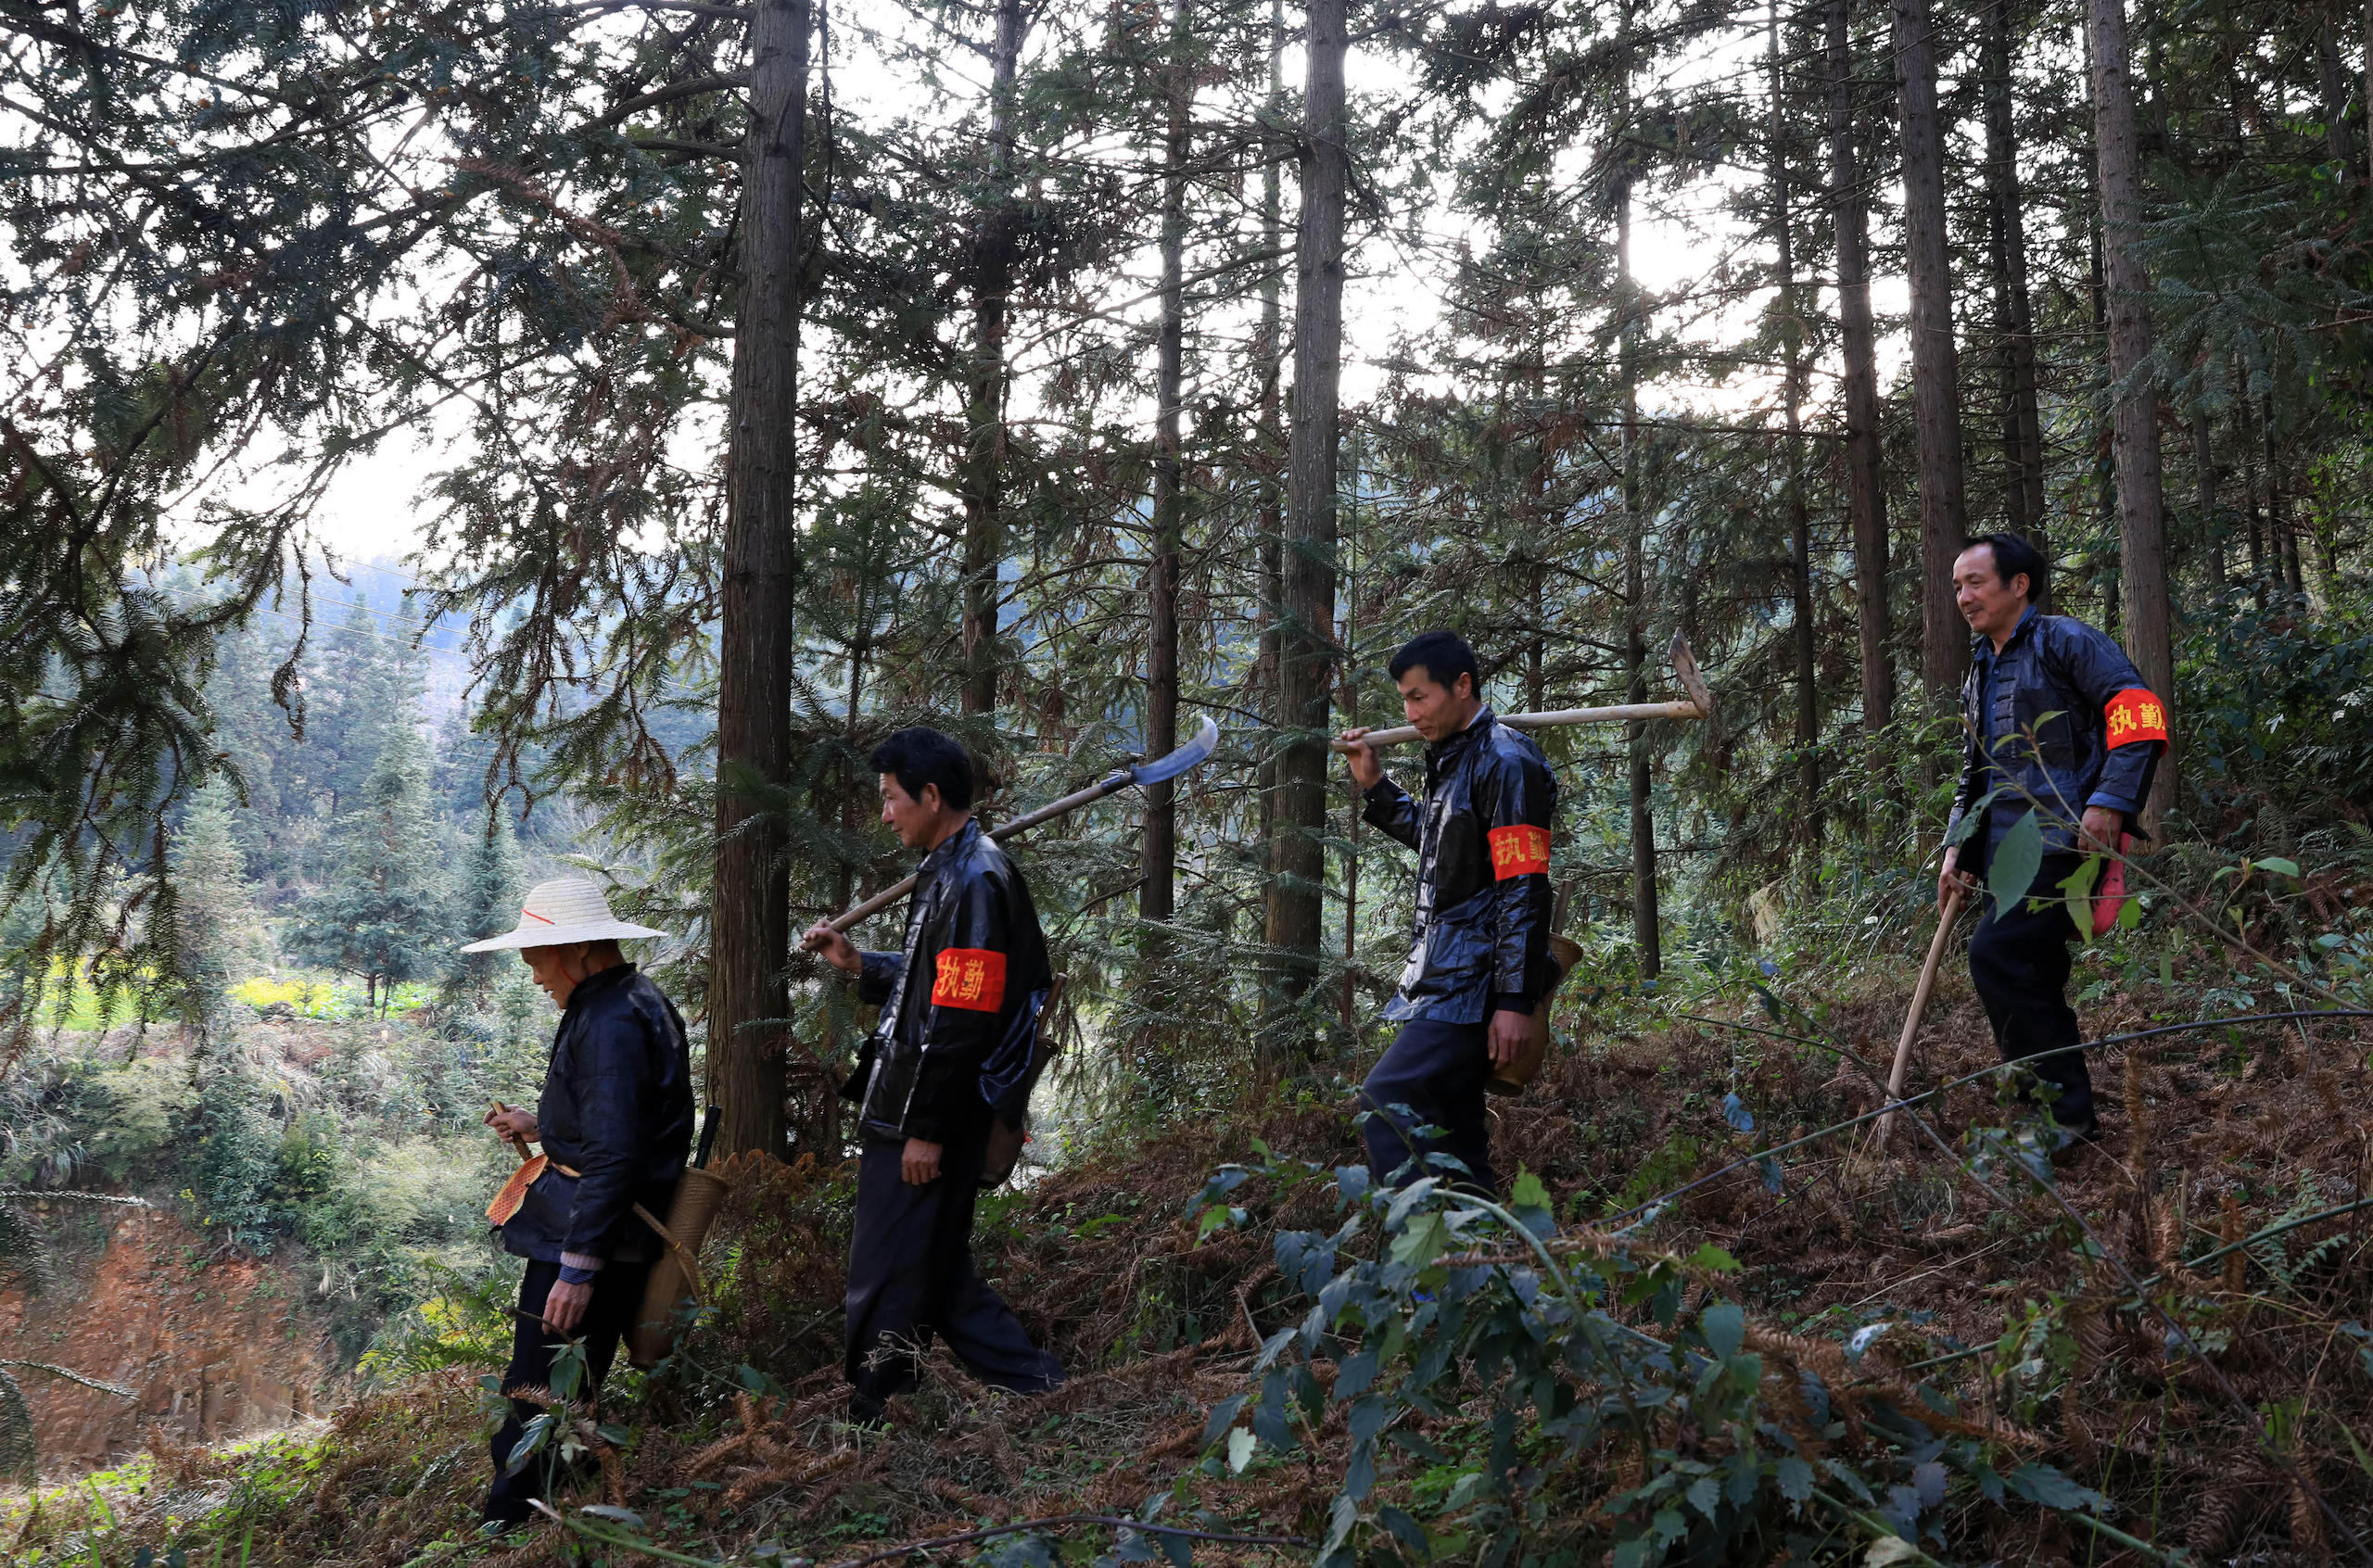 Villagers patrol the forest in Liping County in Guizhou, southwest China (Image: Yang Daifu / Alamy)